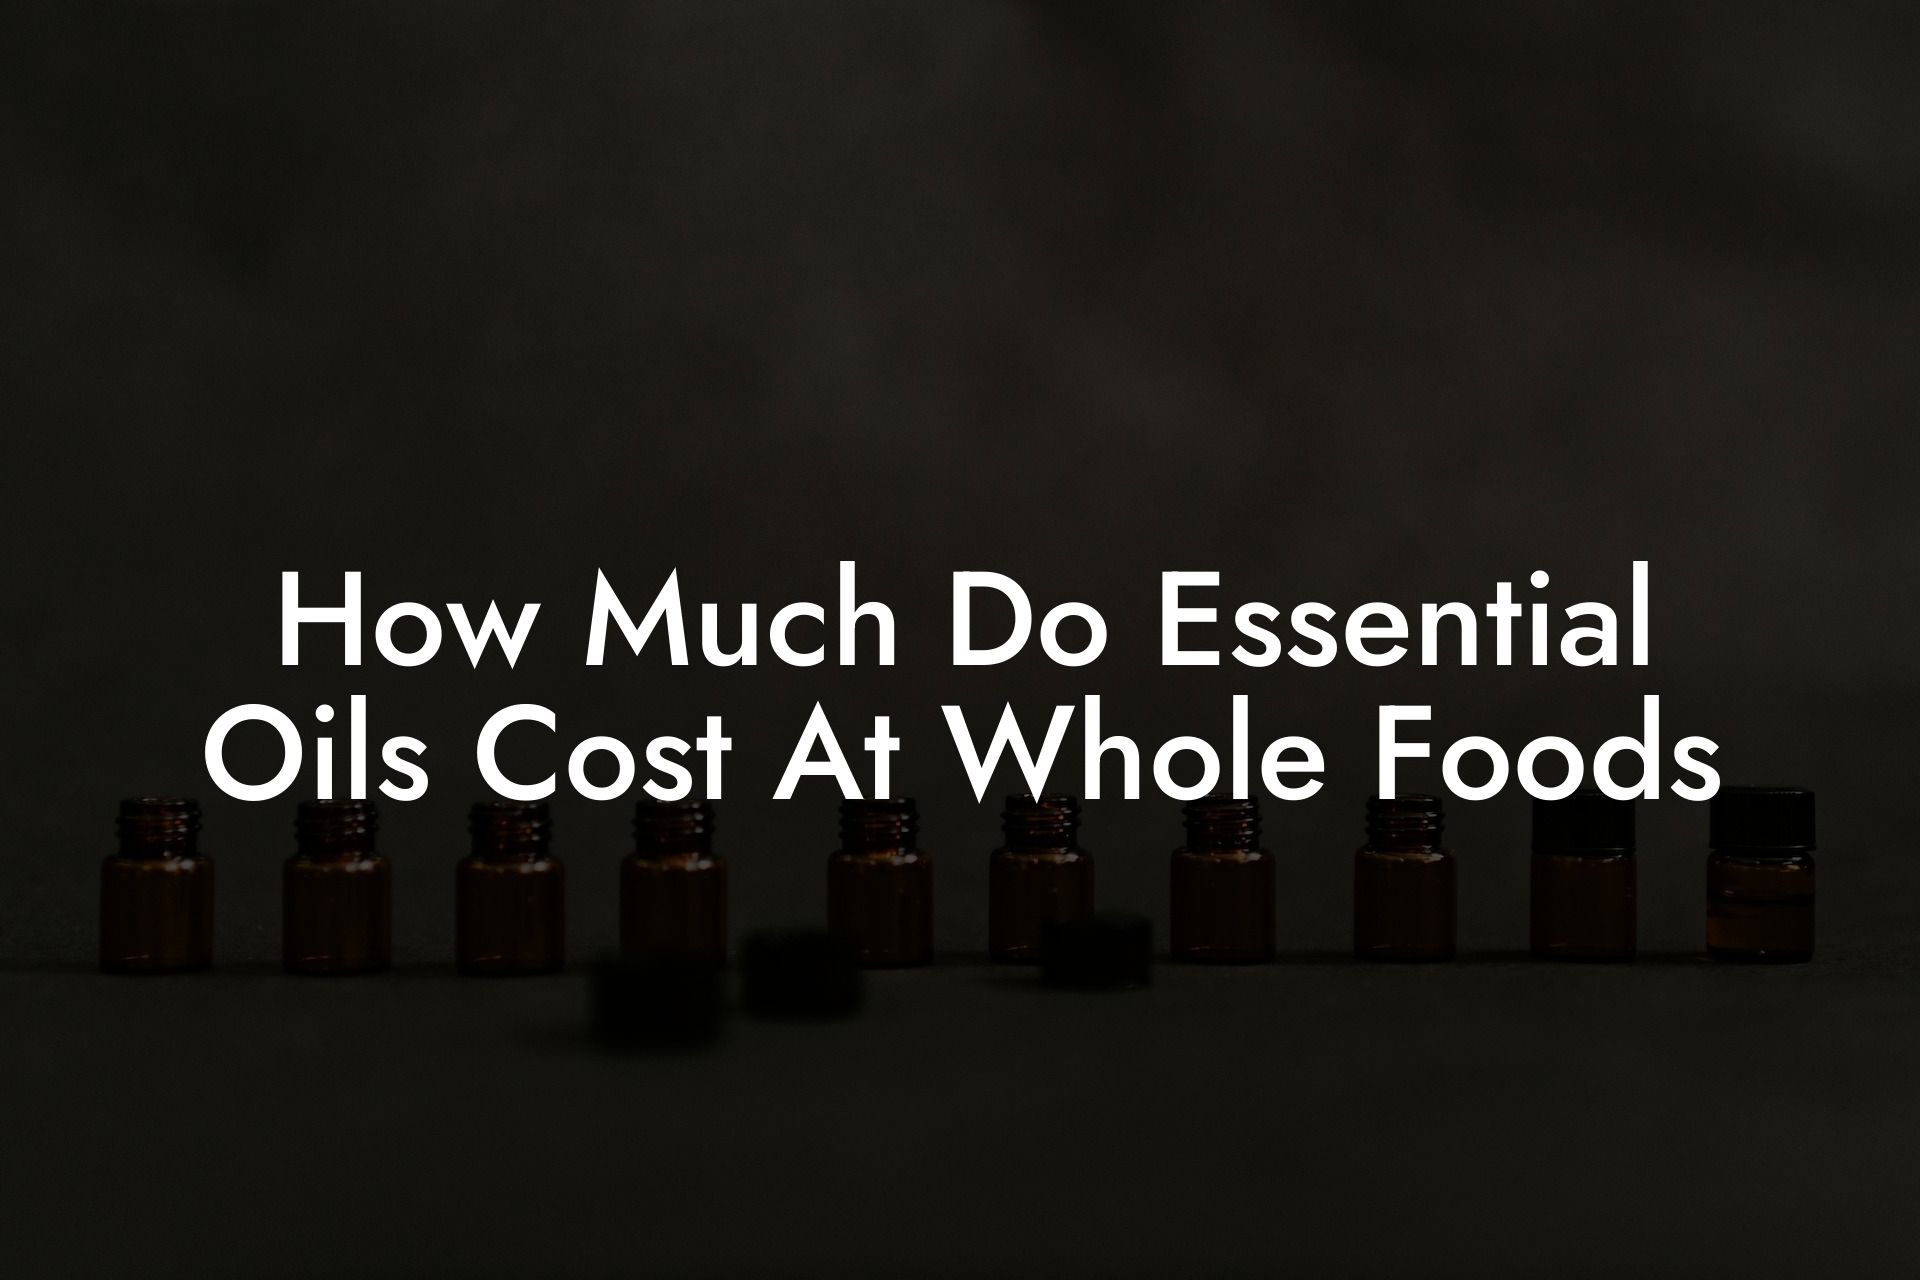 How Much Do Essential Oils Cost At Whole Foods